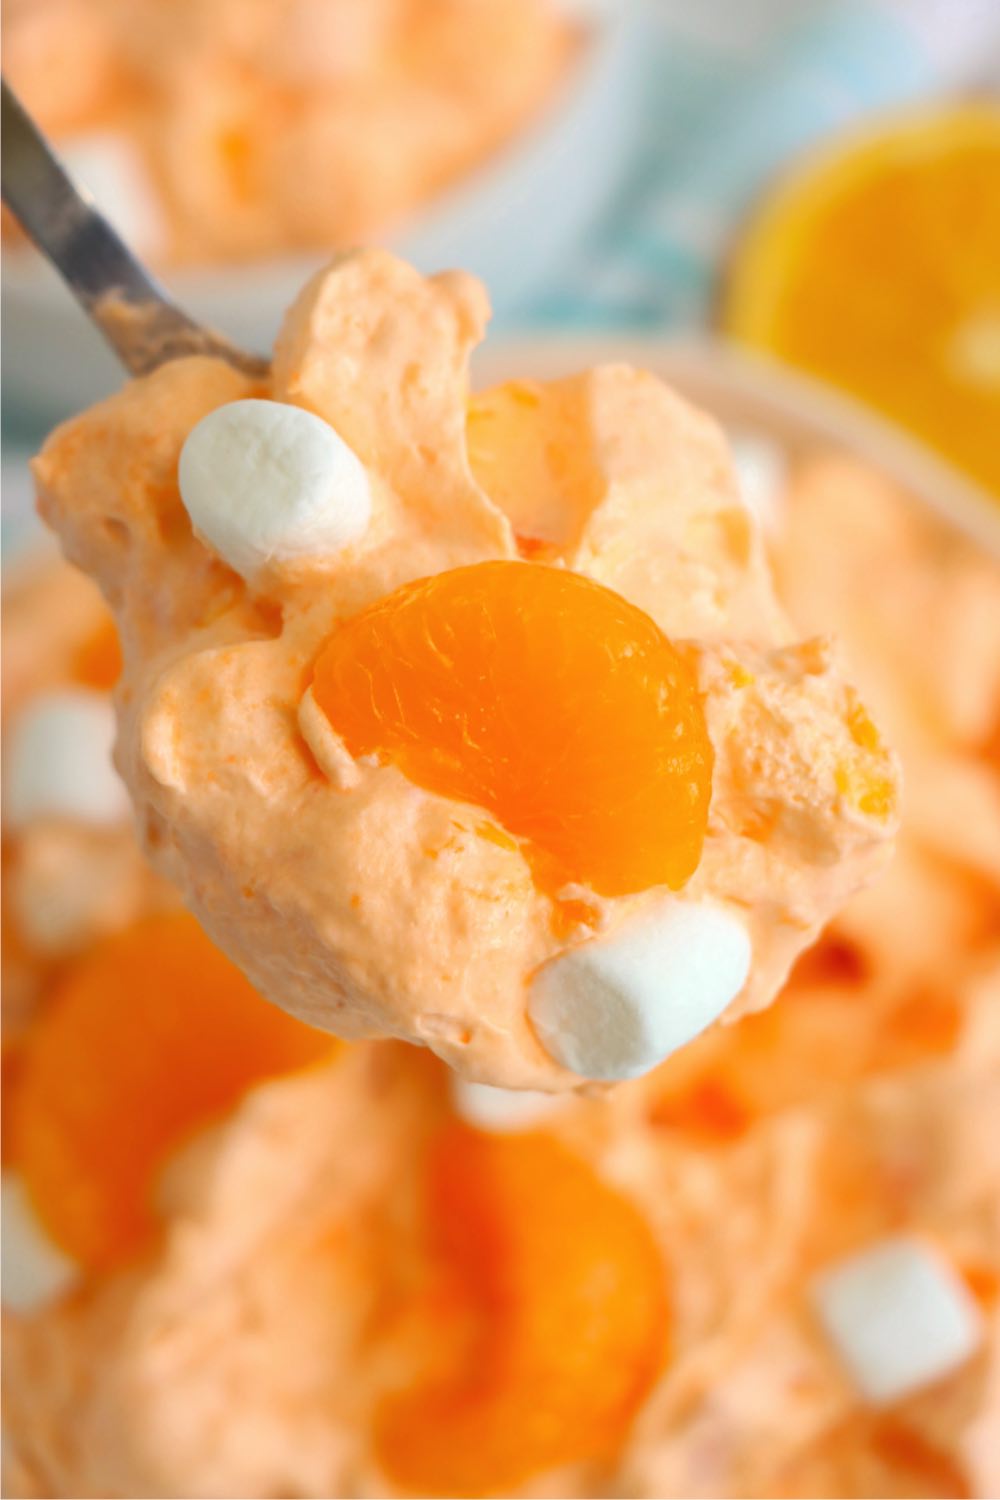 spoon filled with orange creamsicle salad